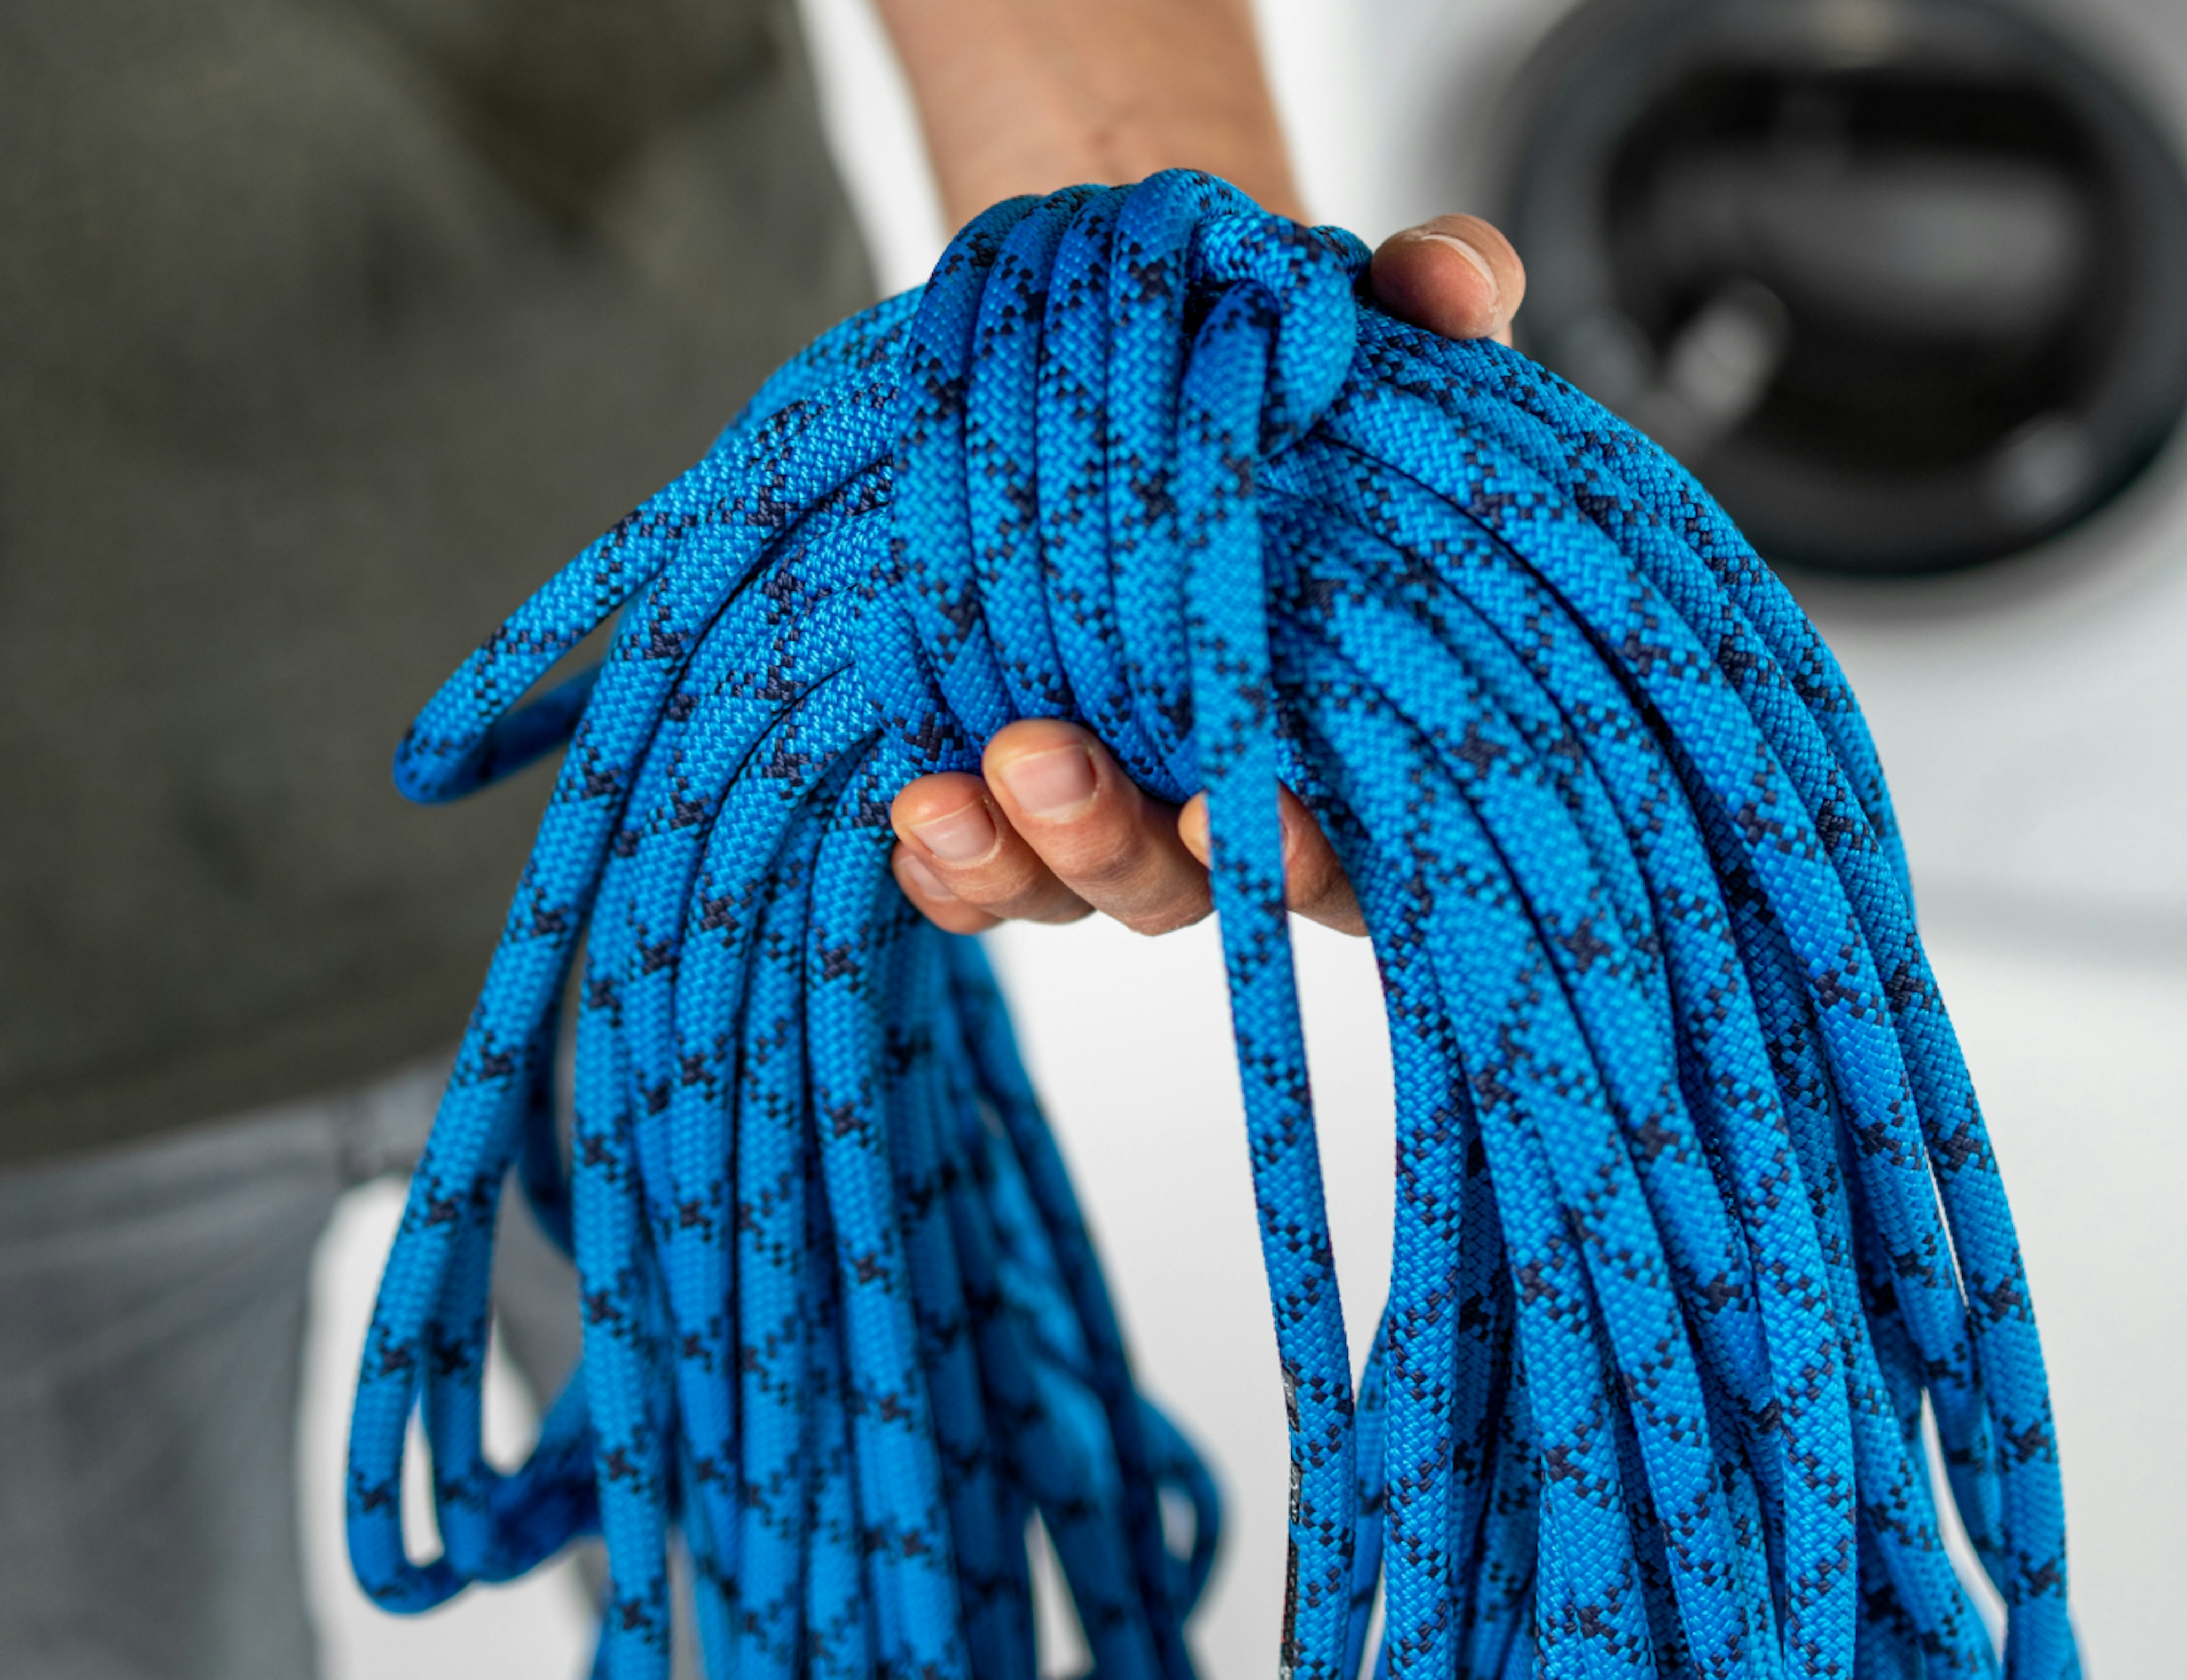 The finished rope is shown